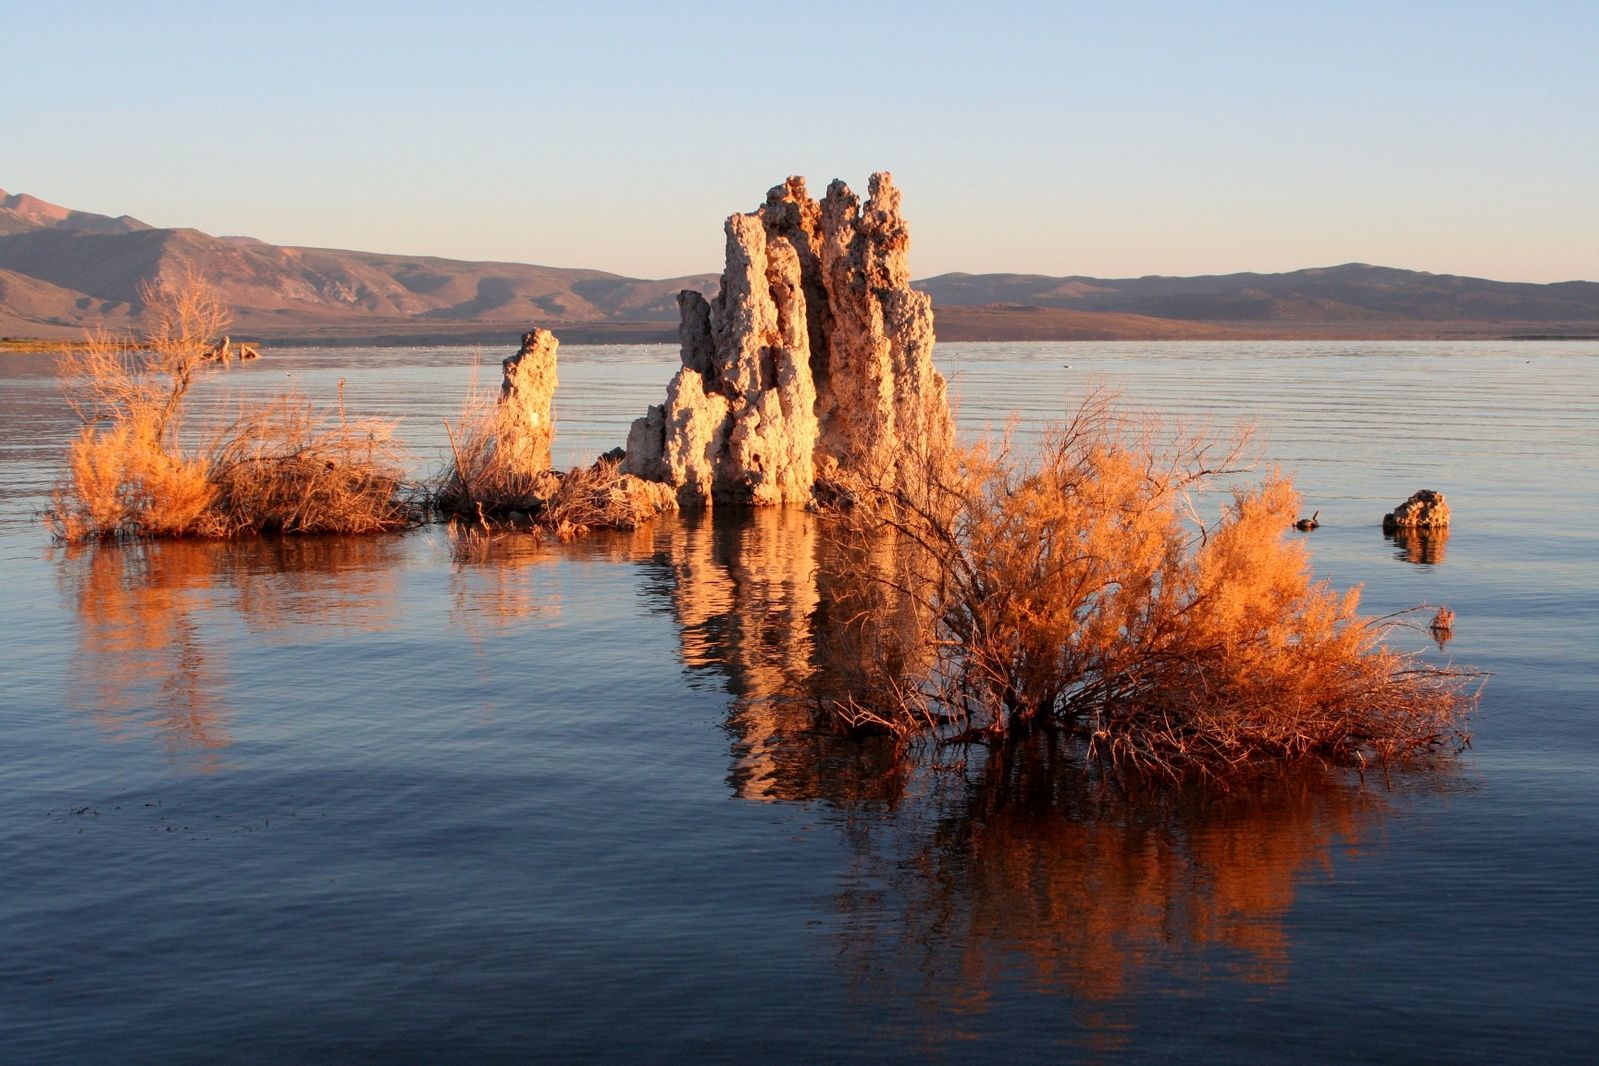 Tufa towers (calcium carbonate) in Mono Lake, California. Evaporation keeps the concentration of ions in the lake very high, allowing the calcium carbonate to precipitate. [Brocken Inaglory CC-BY-SA http://bit.ly/20JnS7A]